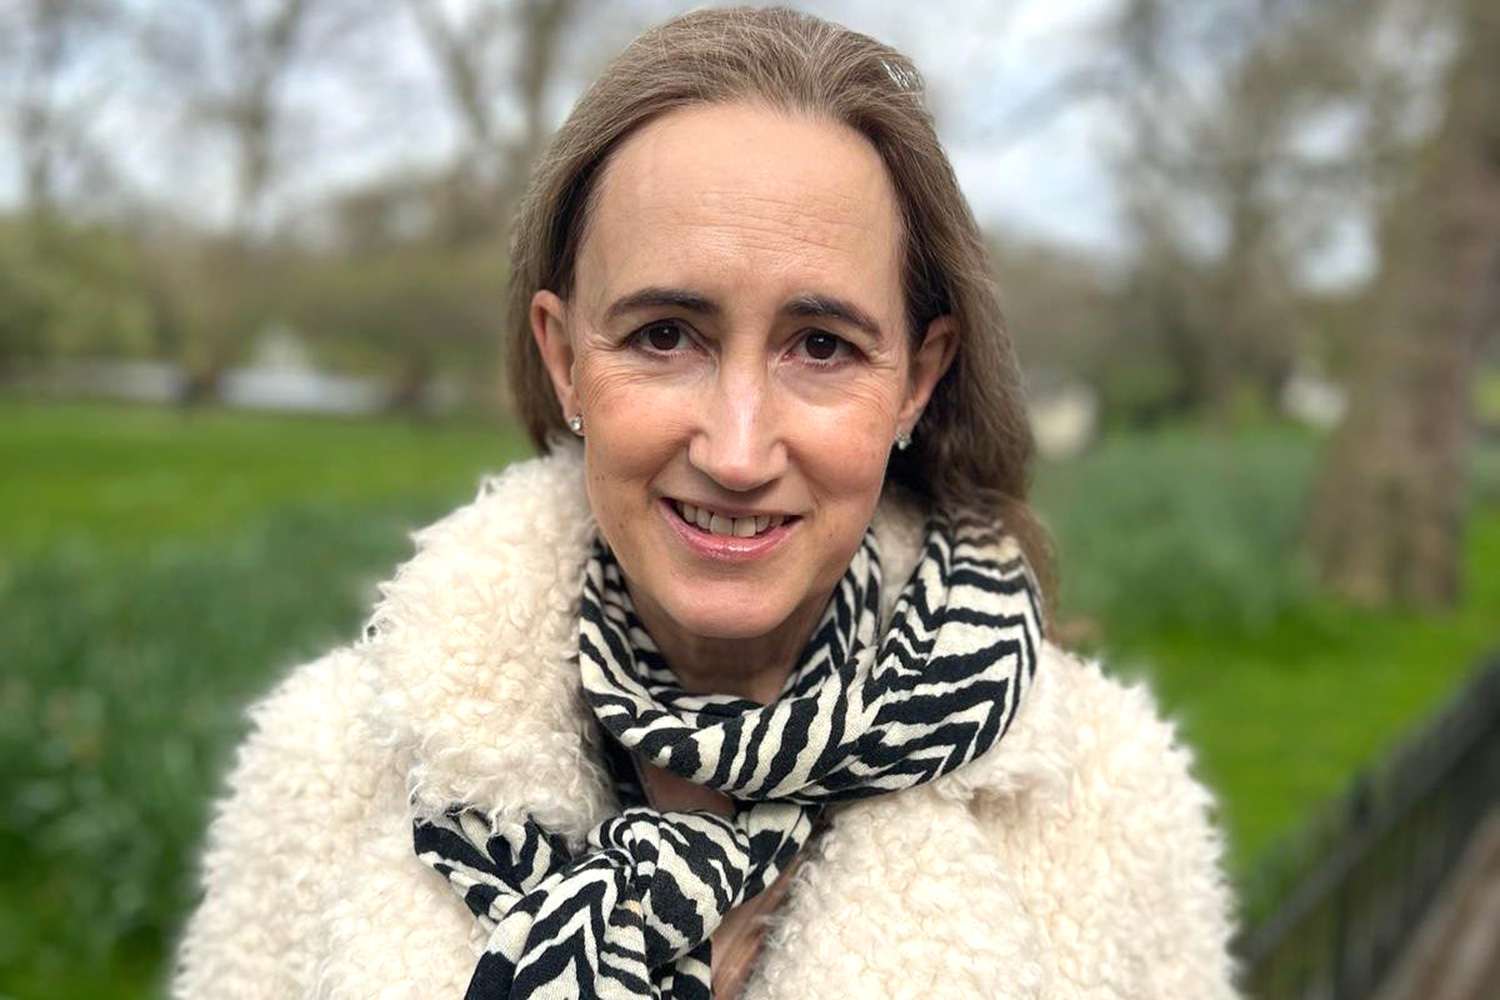 Shopaholic Author Sophie Kinsella, 54, Diagnosed with Brain Cancer [Video]